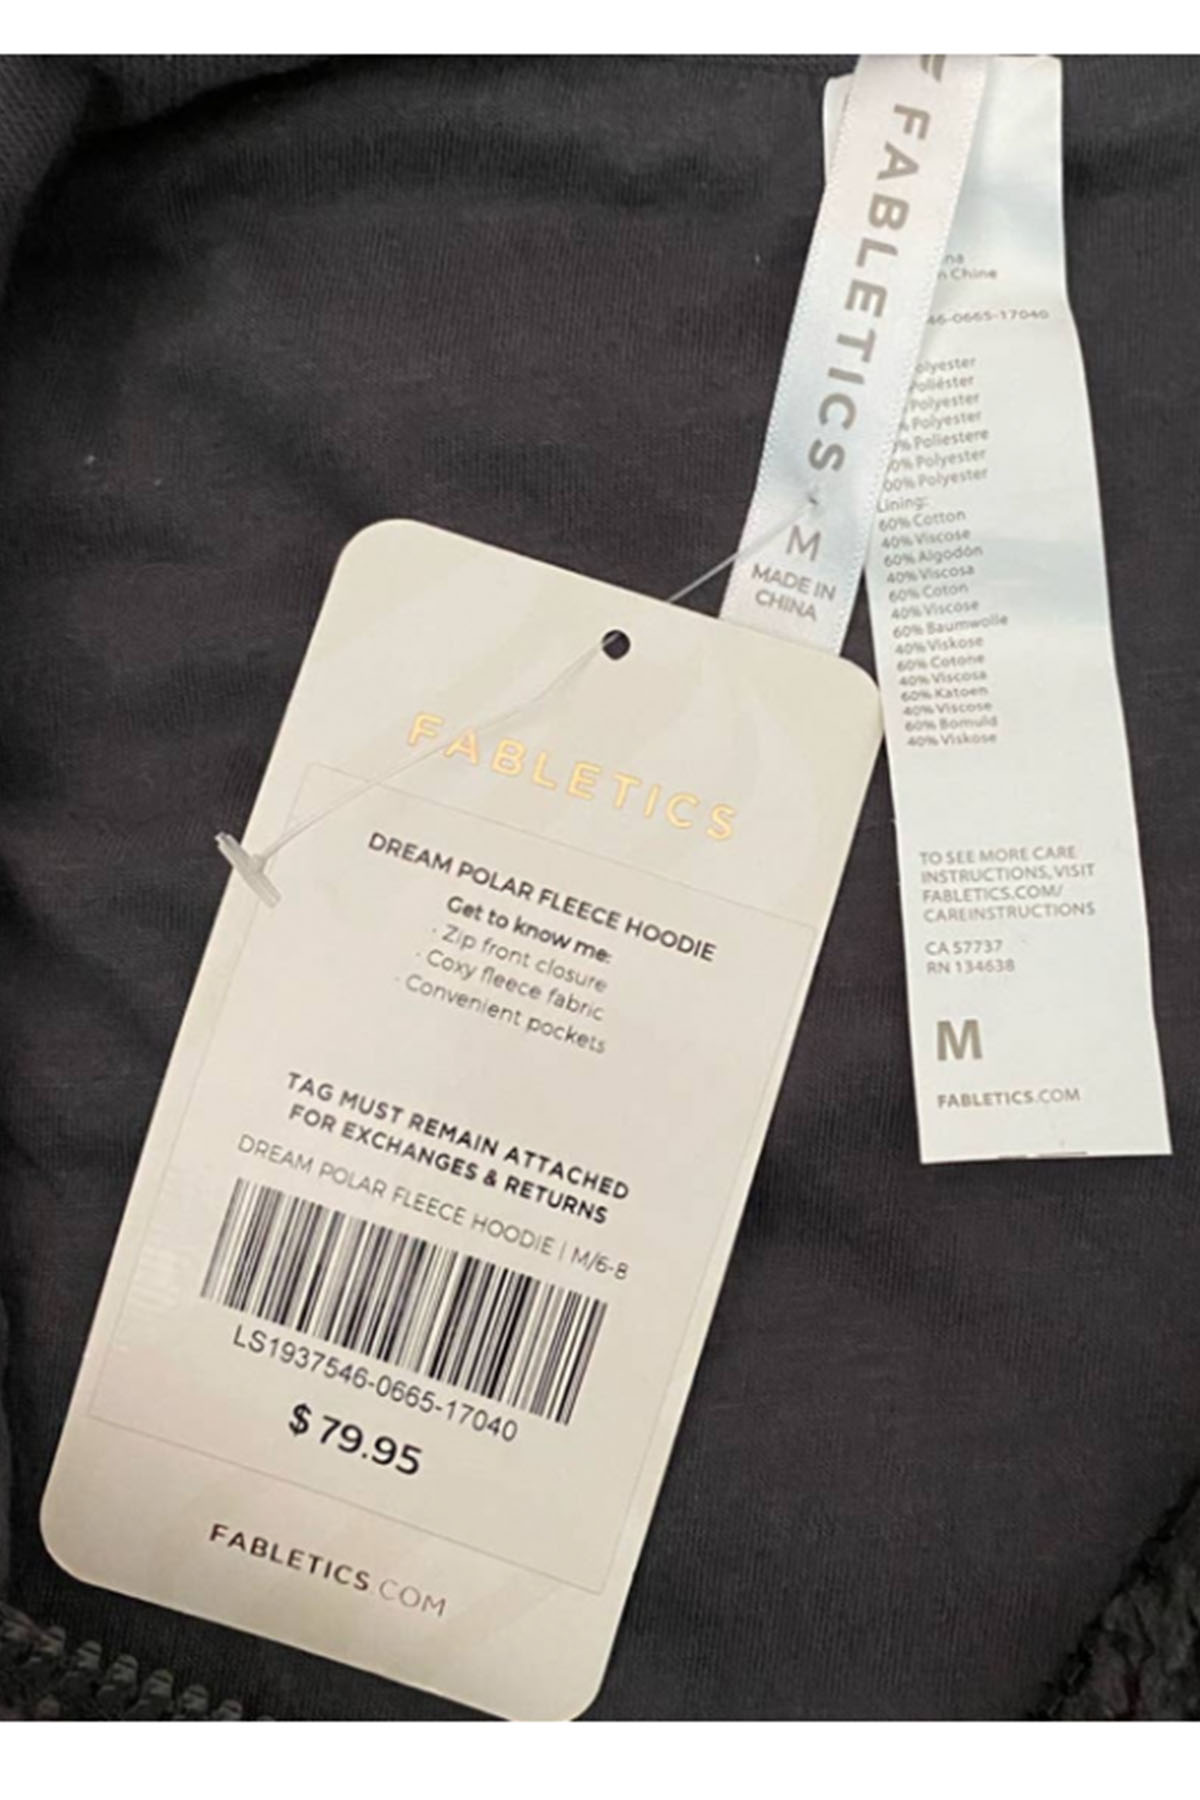 a fabletics price tag.